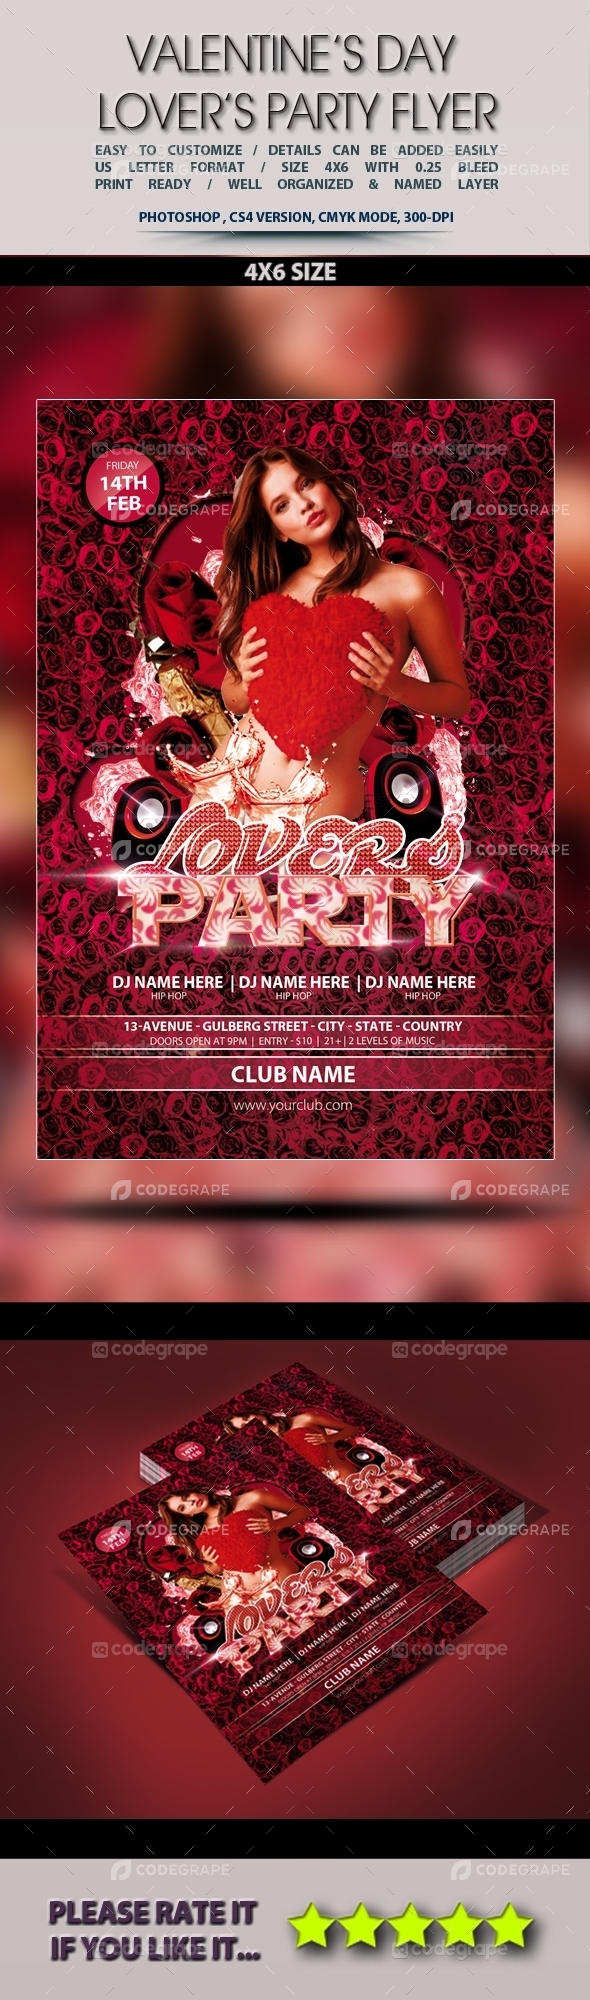 Valentine's Day Lover Party Flyer